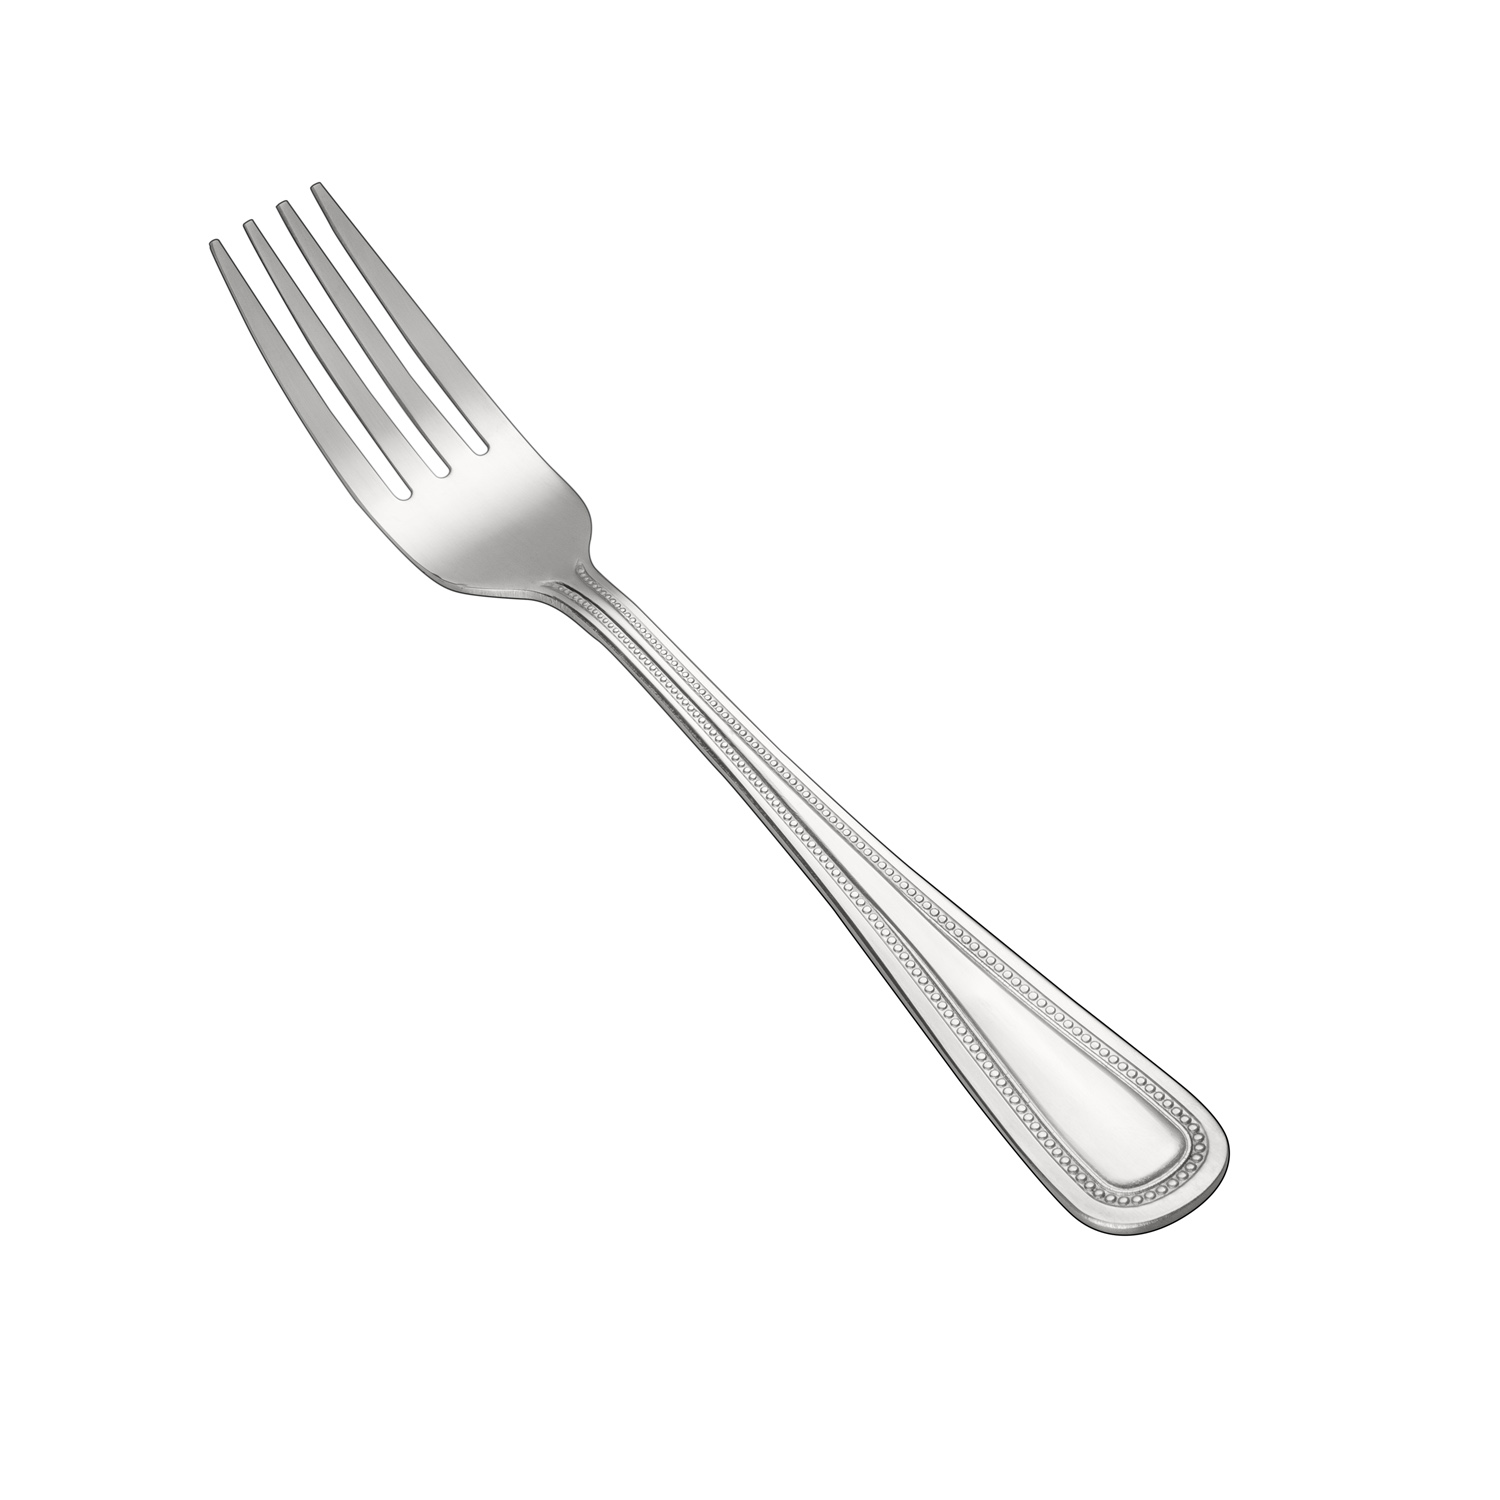 CAC China 3008-05 Black Pearl Dinner Fork, Heavyweight 18/0, 7 3/8"